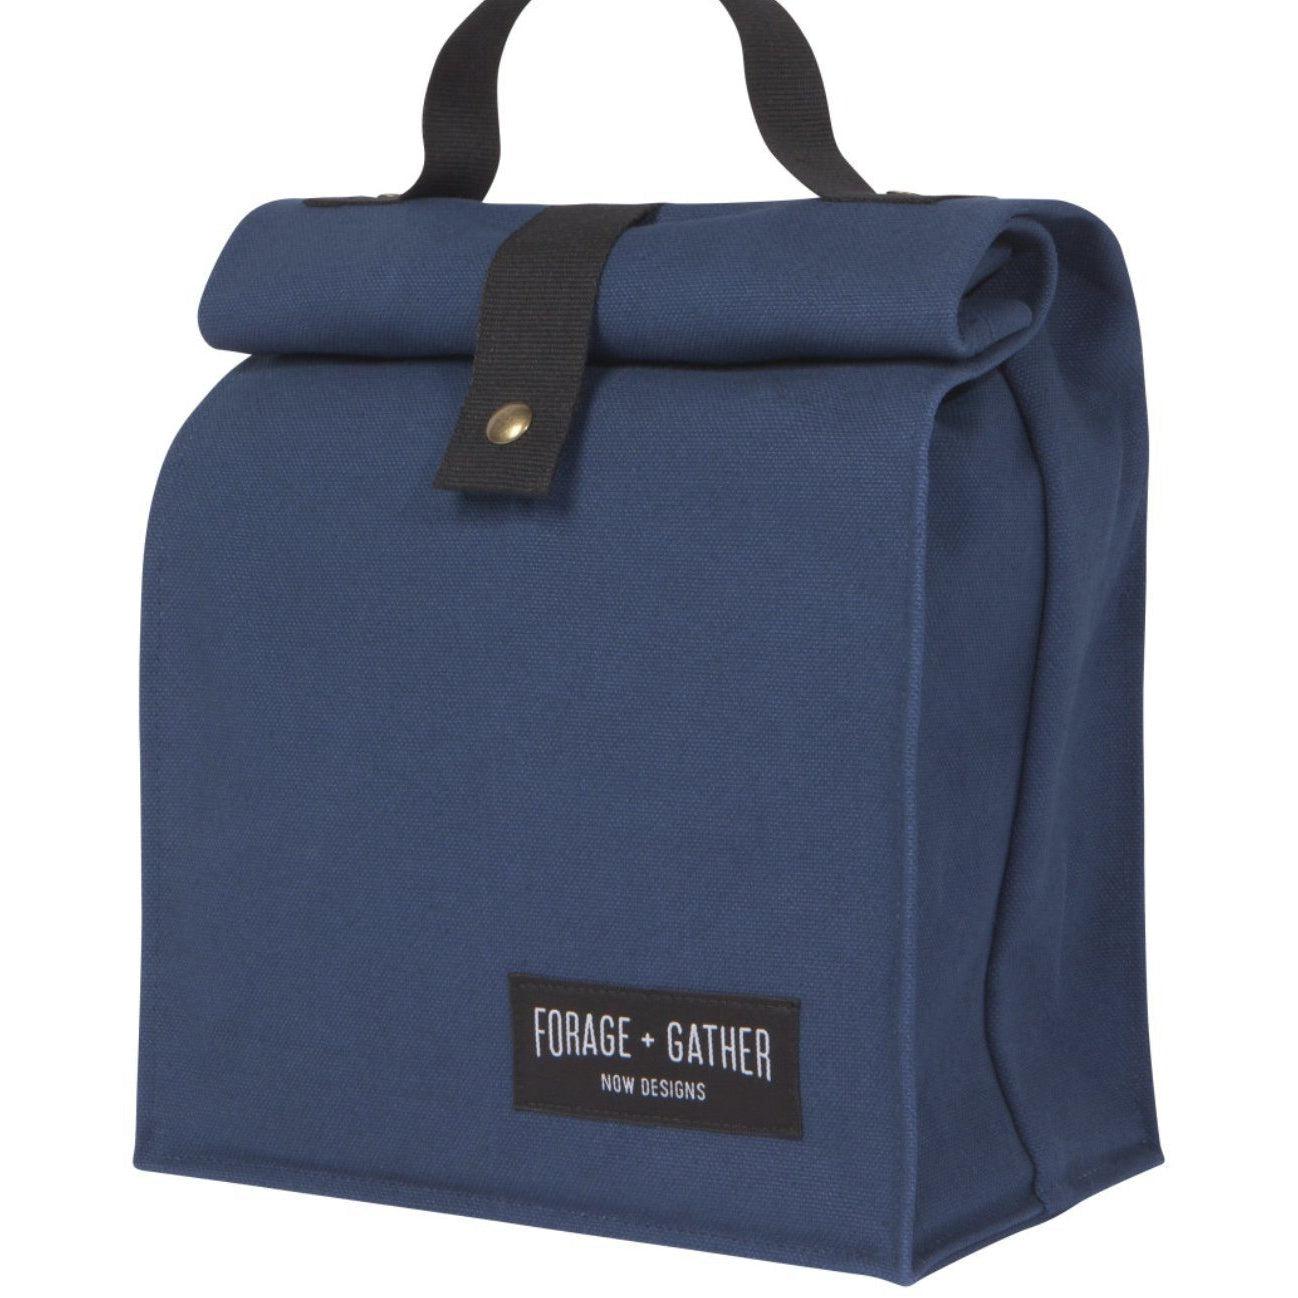 Lunch Bag - Forage & Gather Bags Now Designs Blue Prettycleanshop